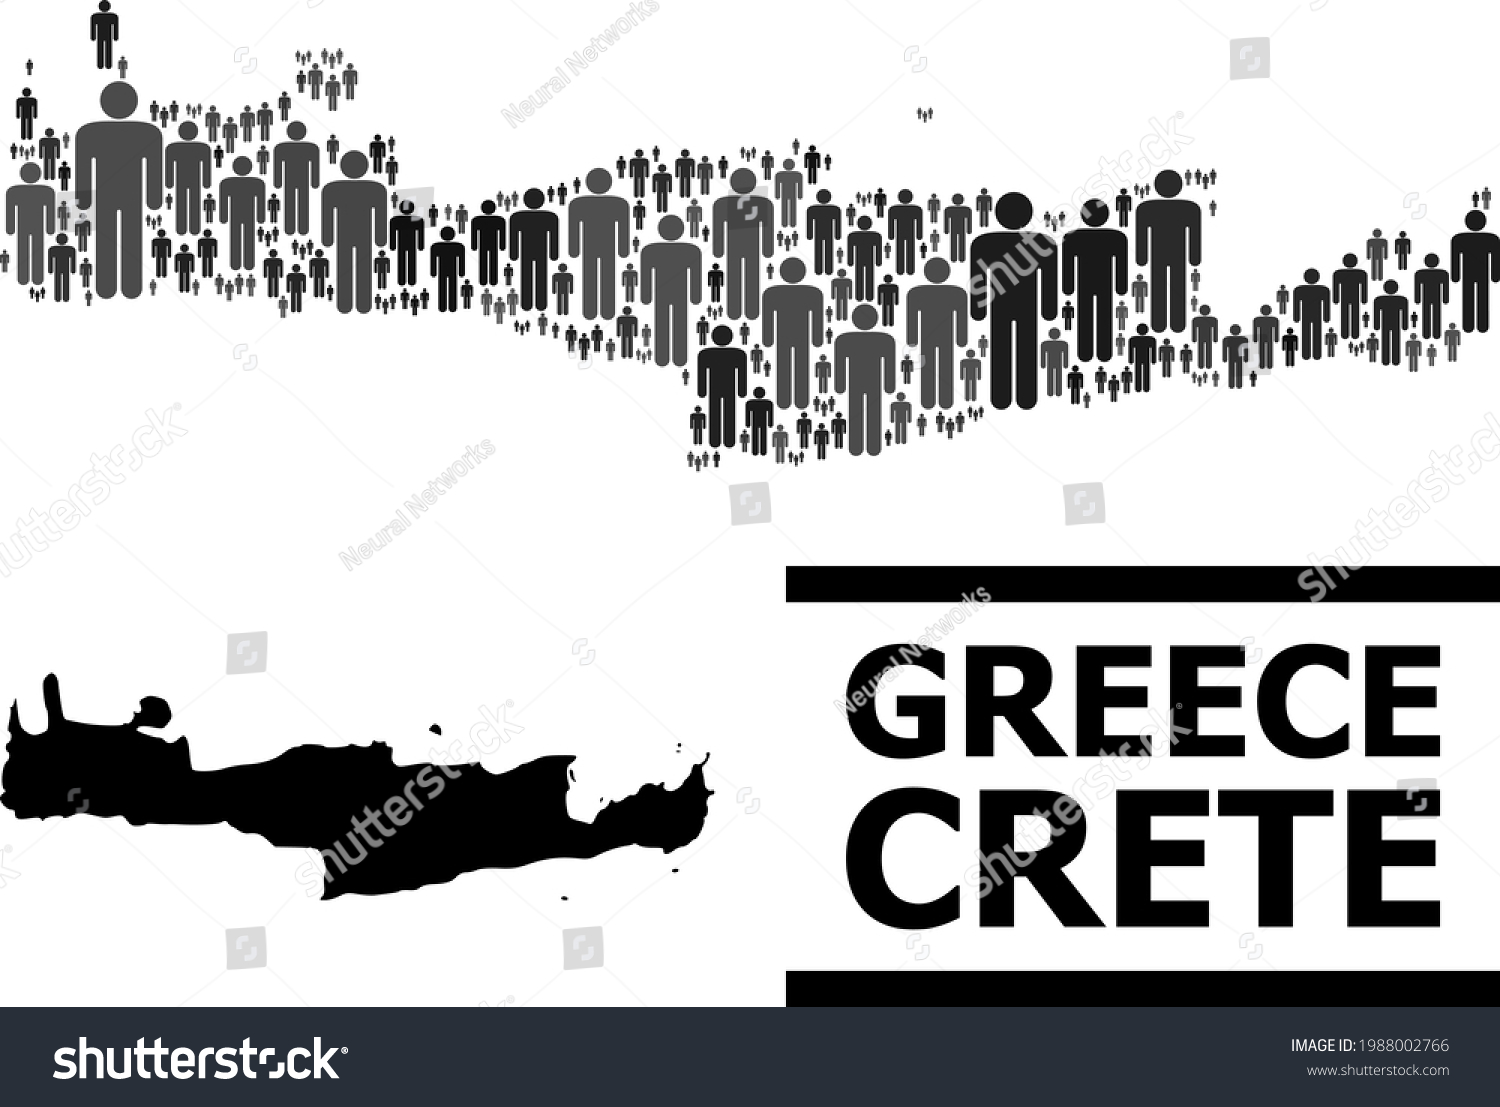 SVG of Map of Crete Island for national projects. Vector nation collage. Concept map of Crete Island organized of human pictograms. Demographic concept in dark grey color hues. svg